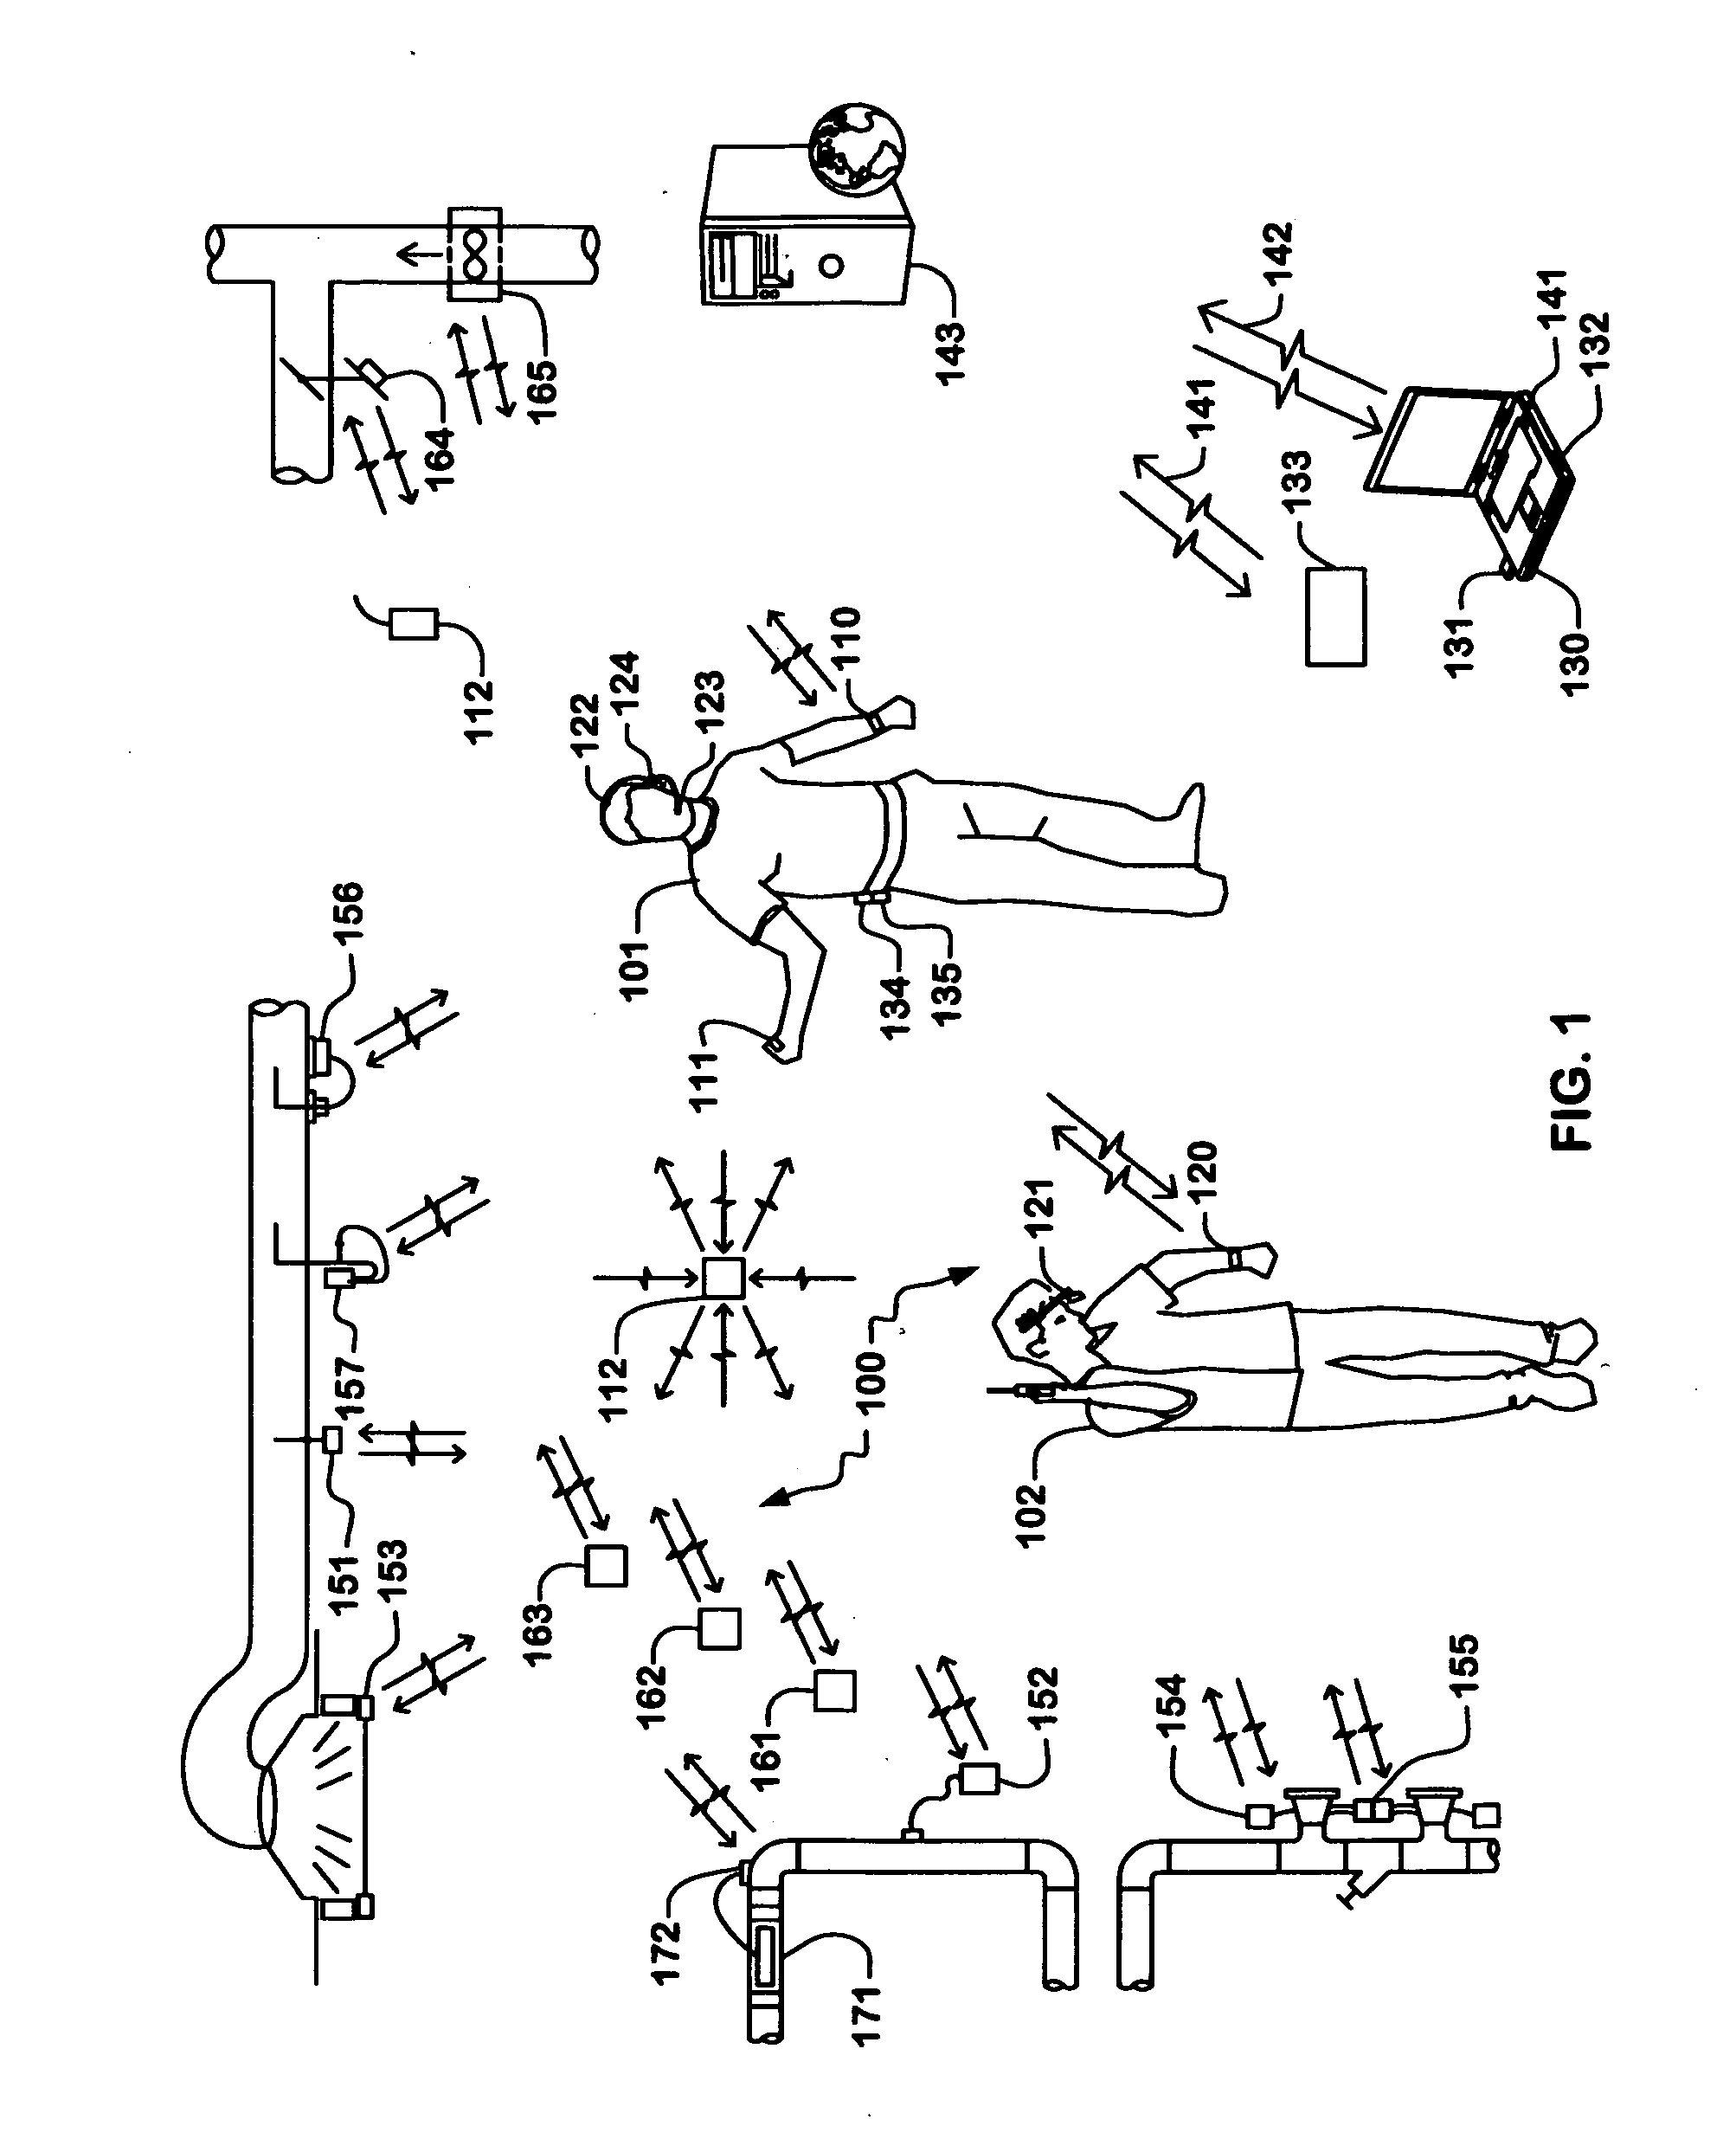 Wireless sensors system and method of using same